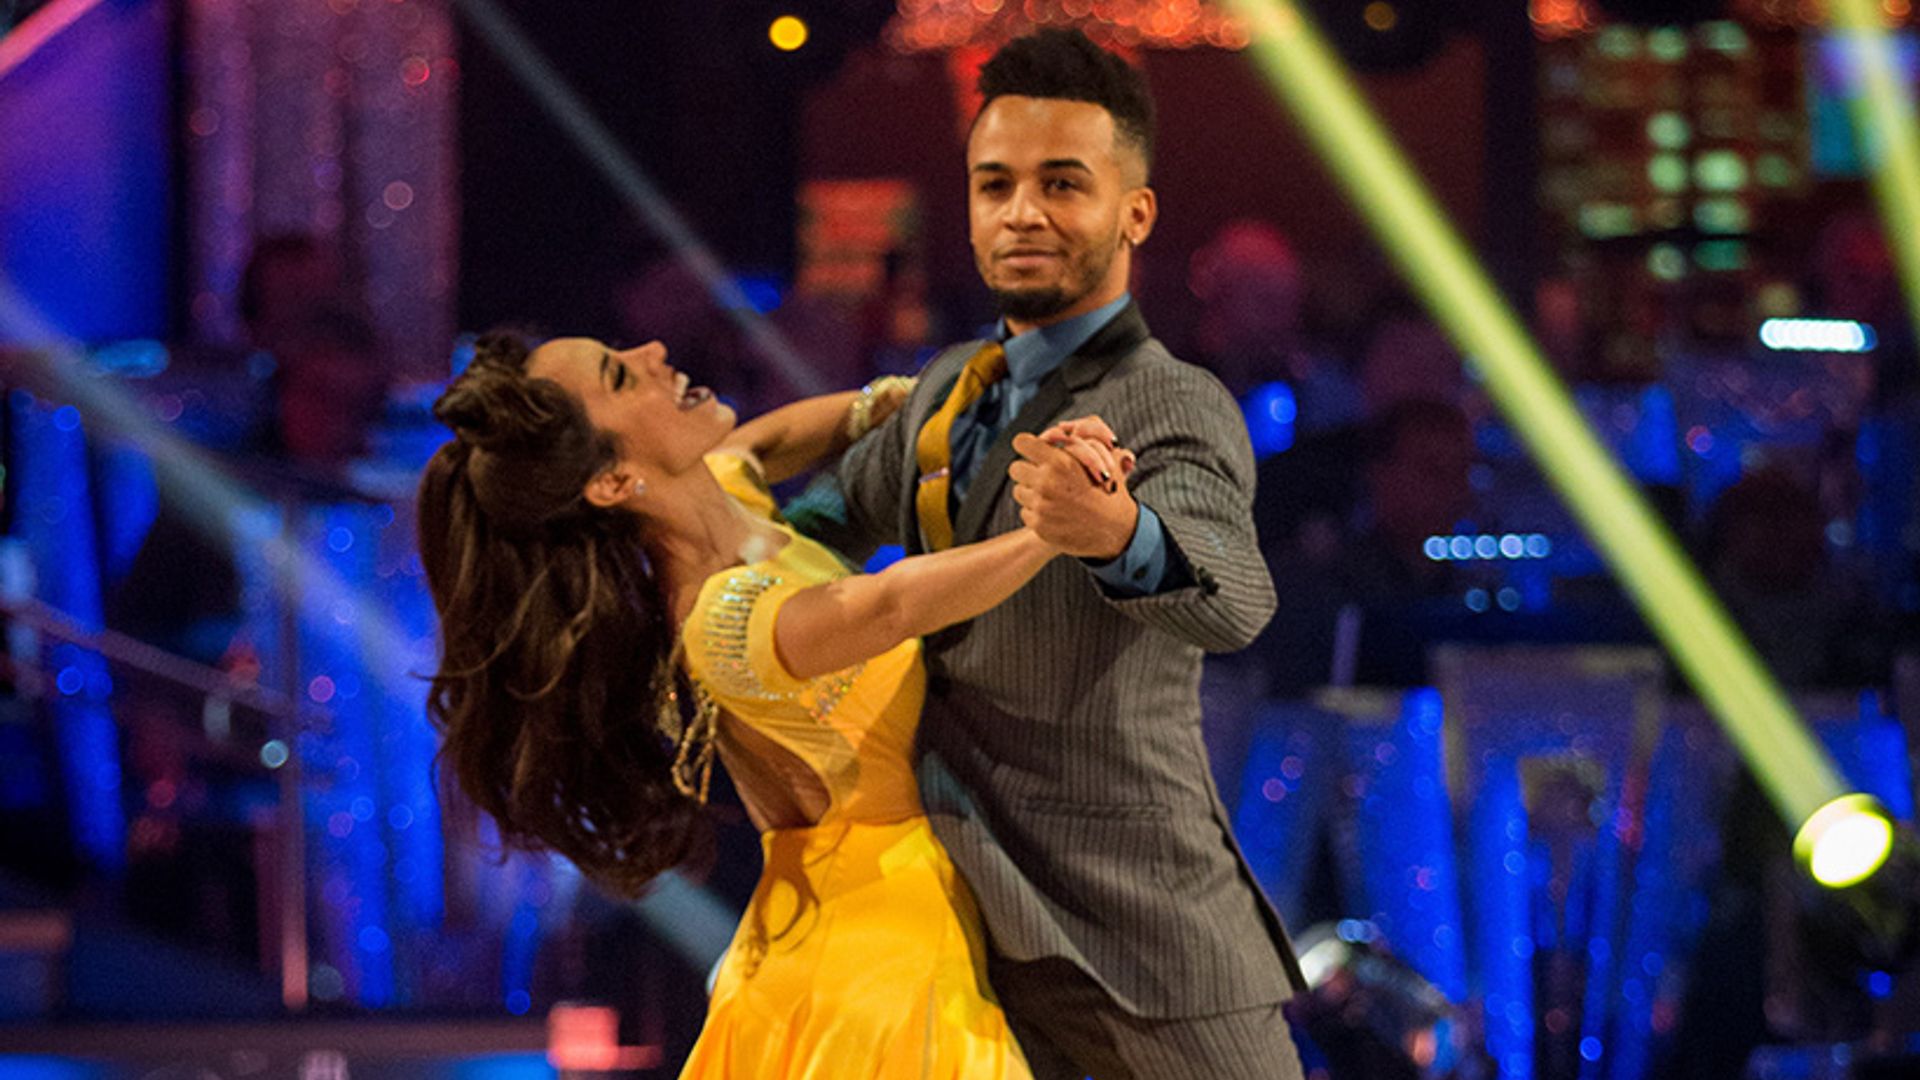 JB Gill supports fellow JLS singer Aston Merrygold on Strictly: watch